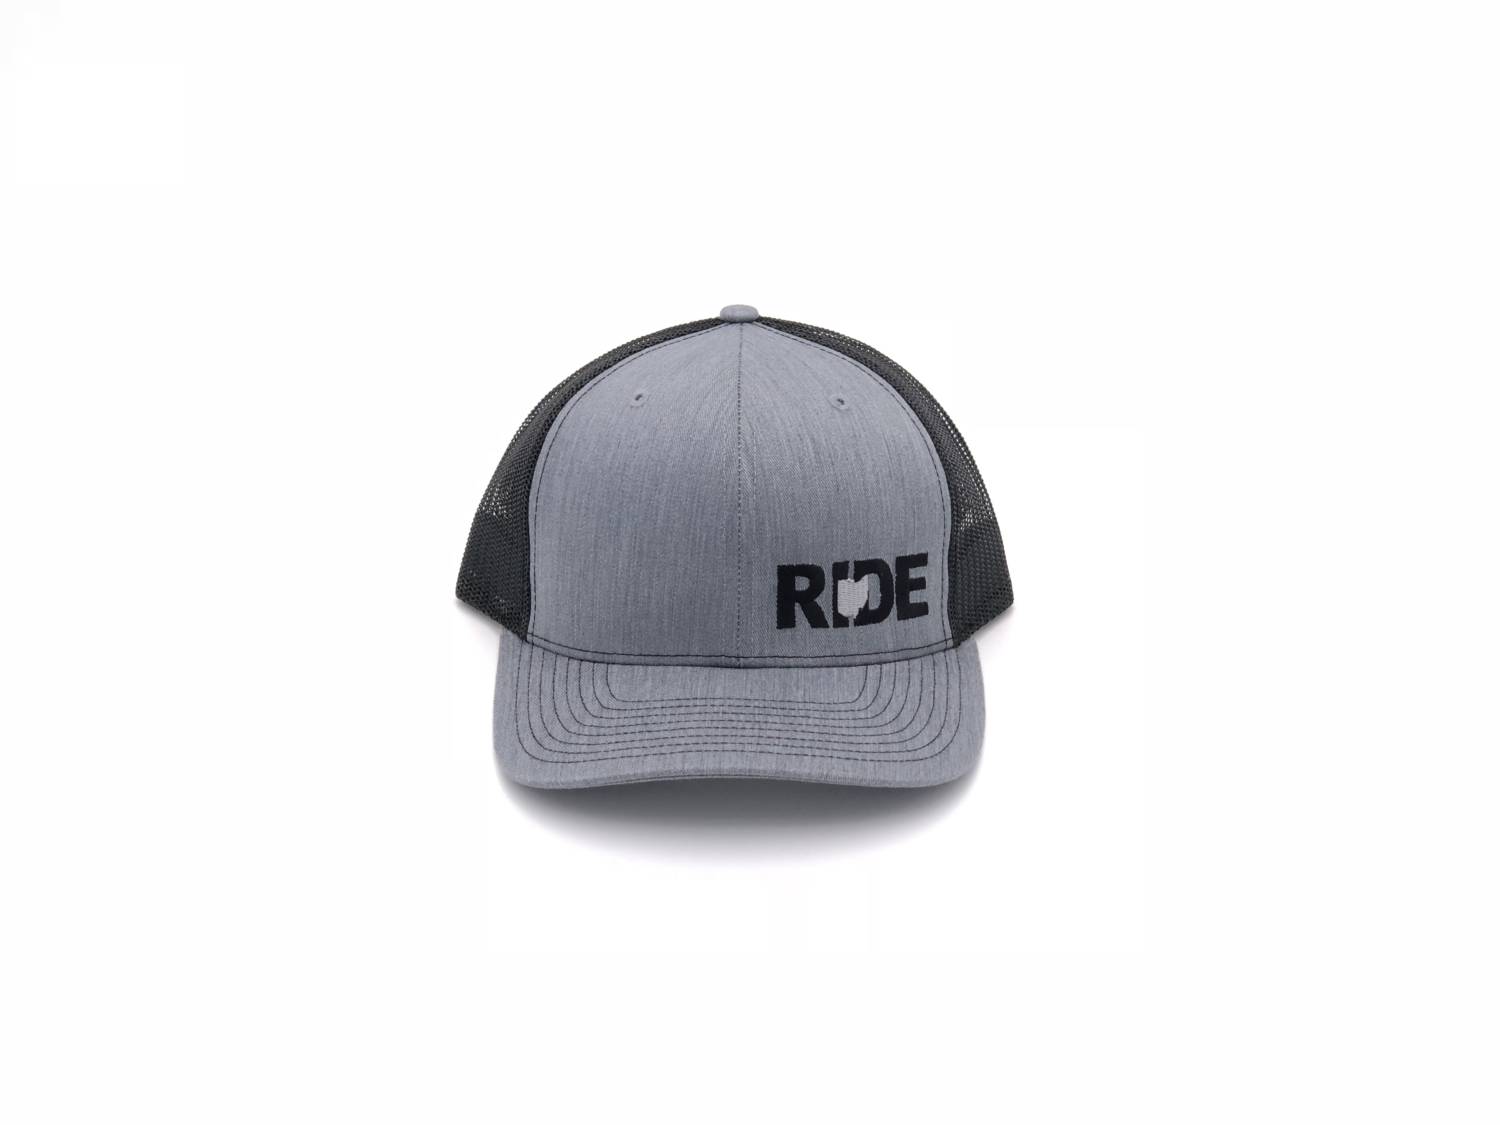 Ride Ohio Night Out Embroidered Snapback Trucker Hat Heather Gray/Black